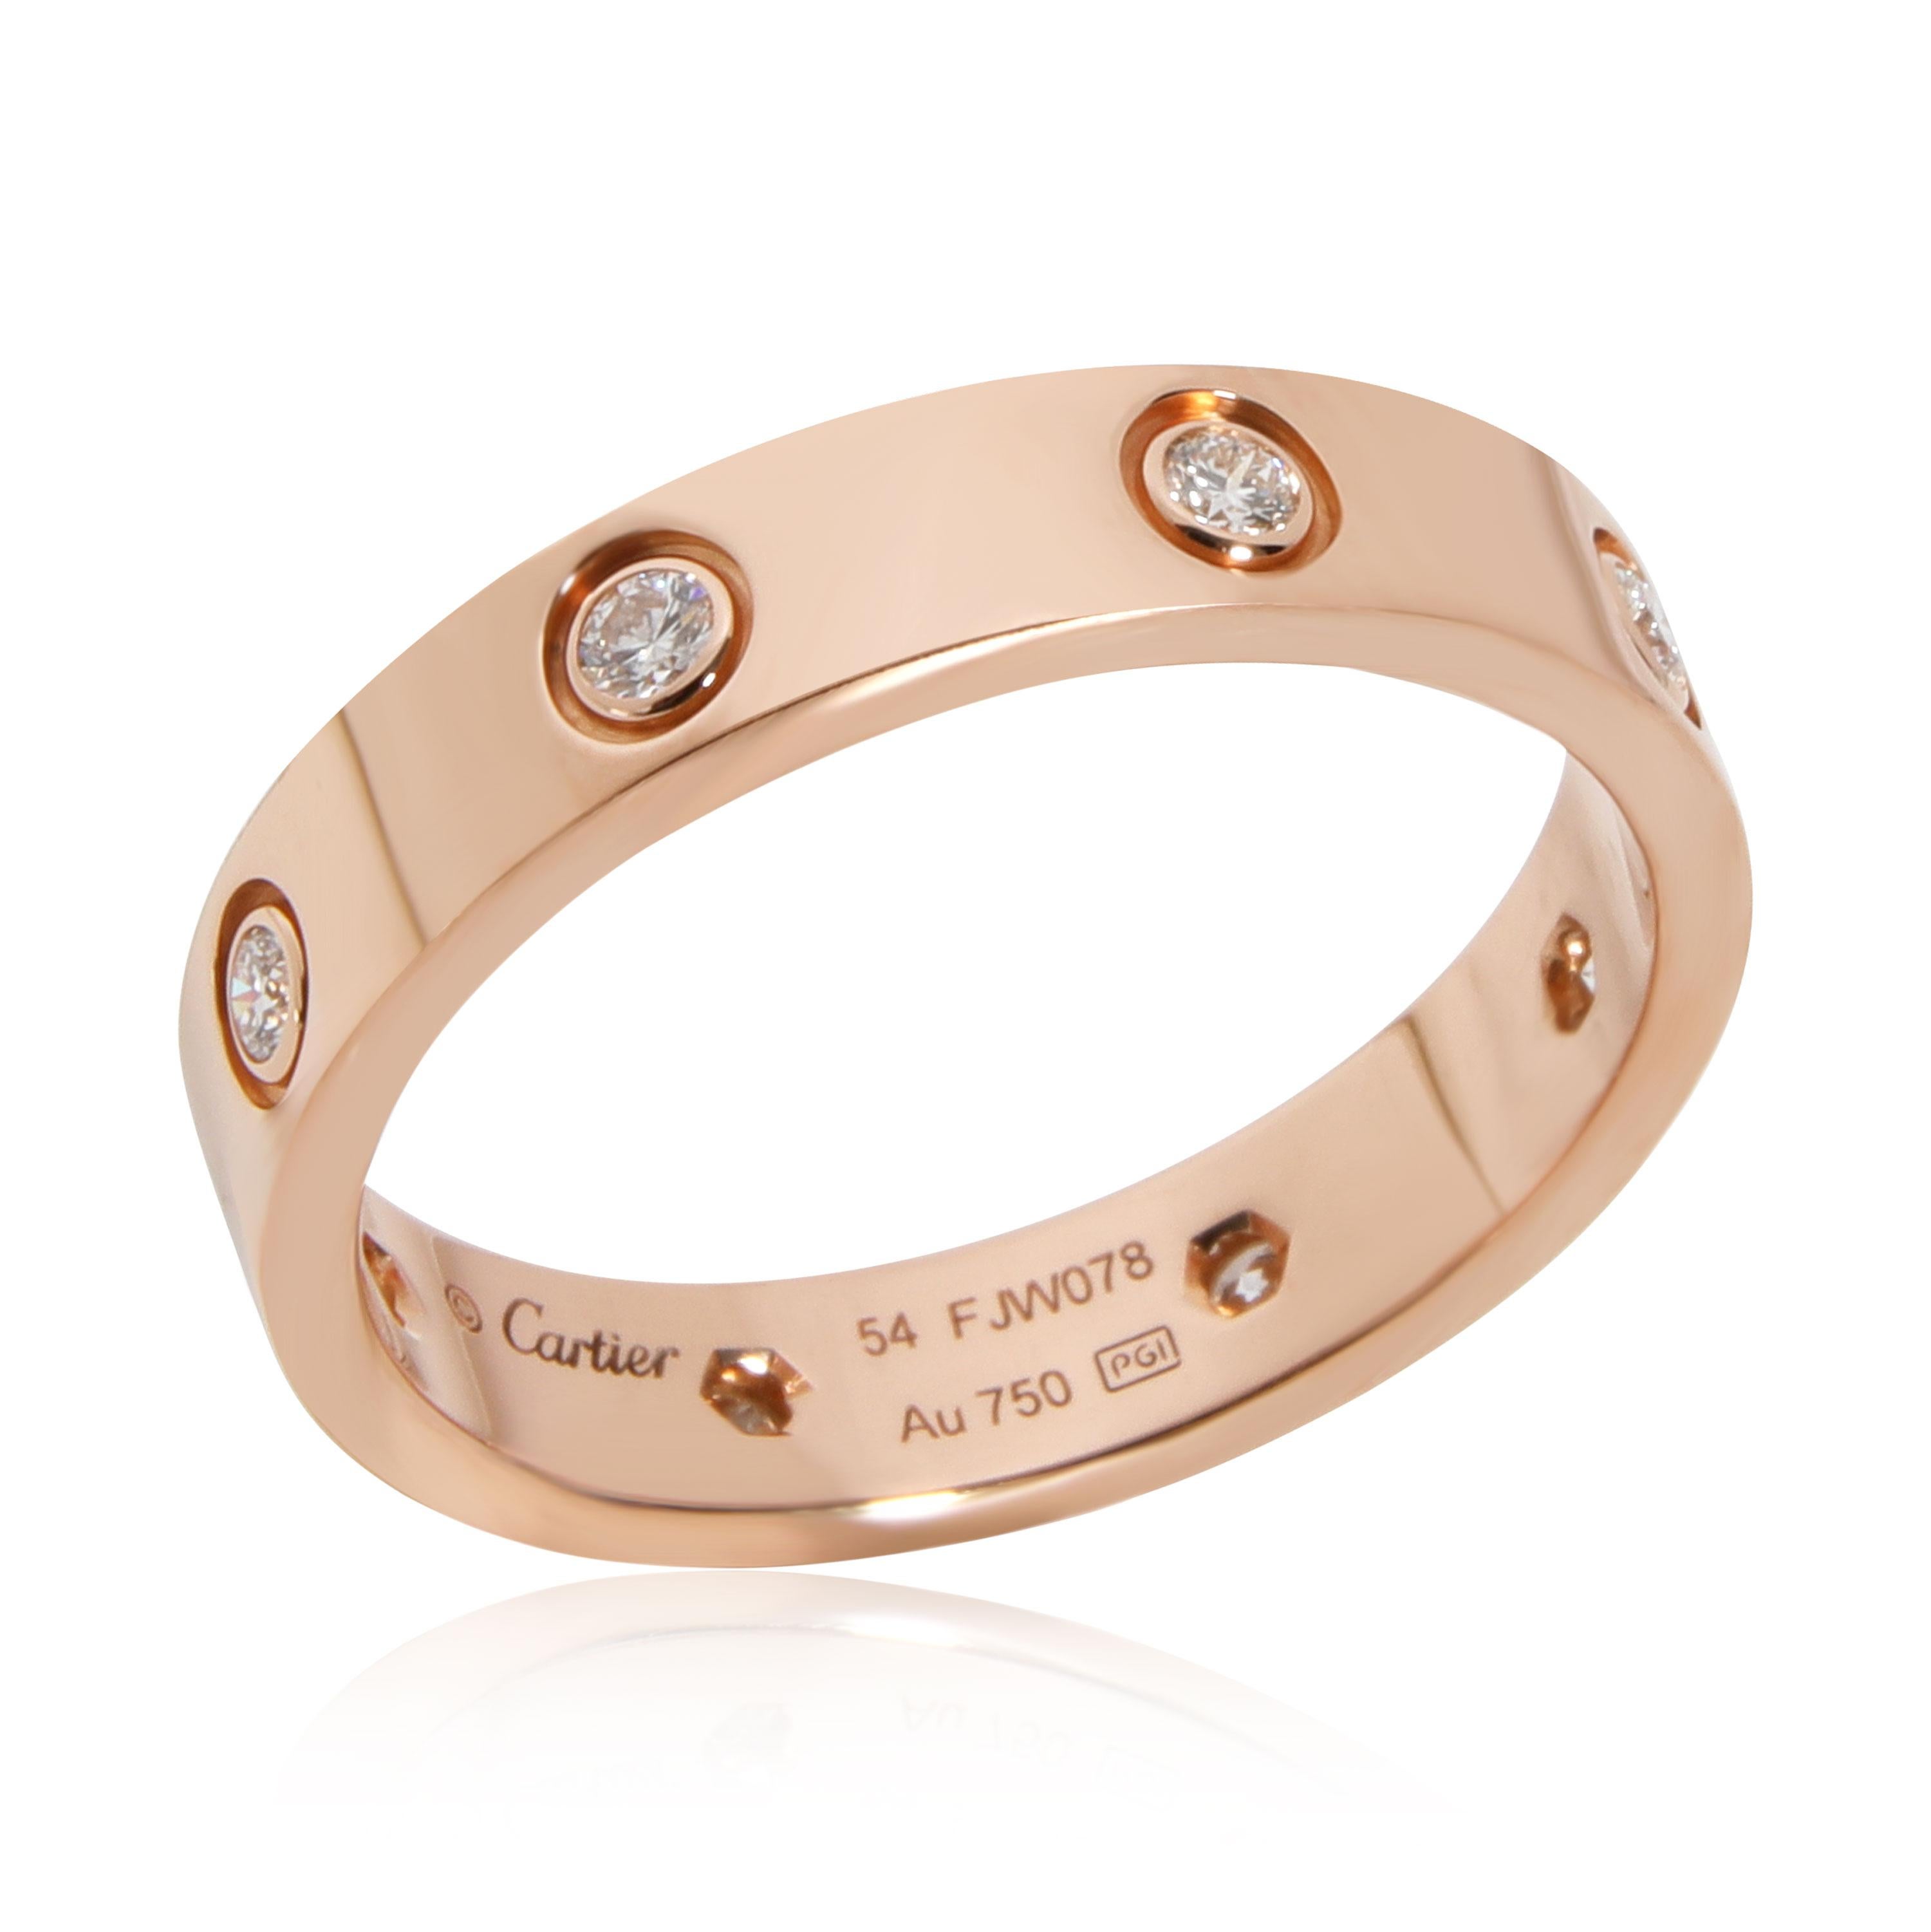 
Cartier Love Diamond Band in 18K Pink Gold 0.19 CTW

PRIMARY DETAILS
SKU: 110585
Listing Title: Cartier Love Diamond Band in 18K Pink Gold 0.19 CTW
Condition Description: Retails for 3,700 USD. In excellent condition and recently polished. Cartier